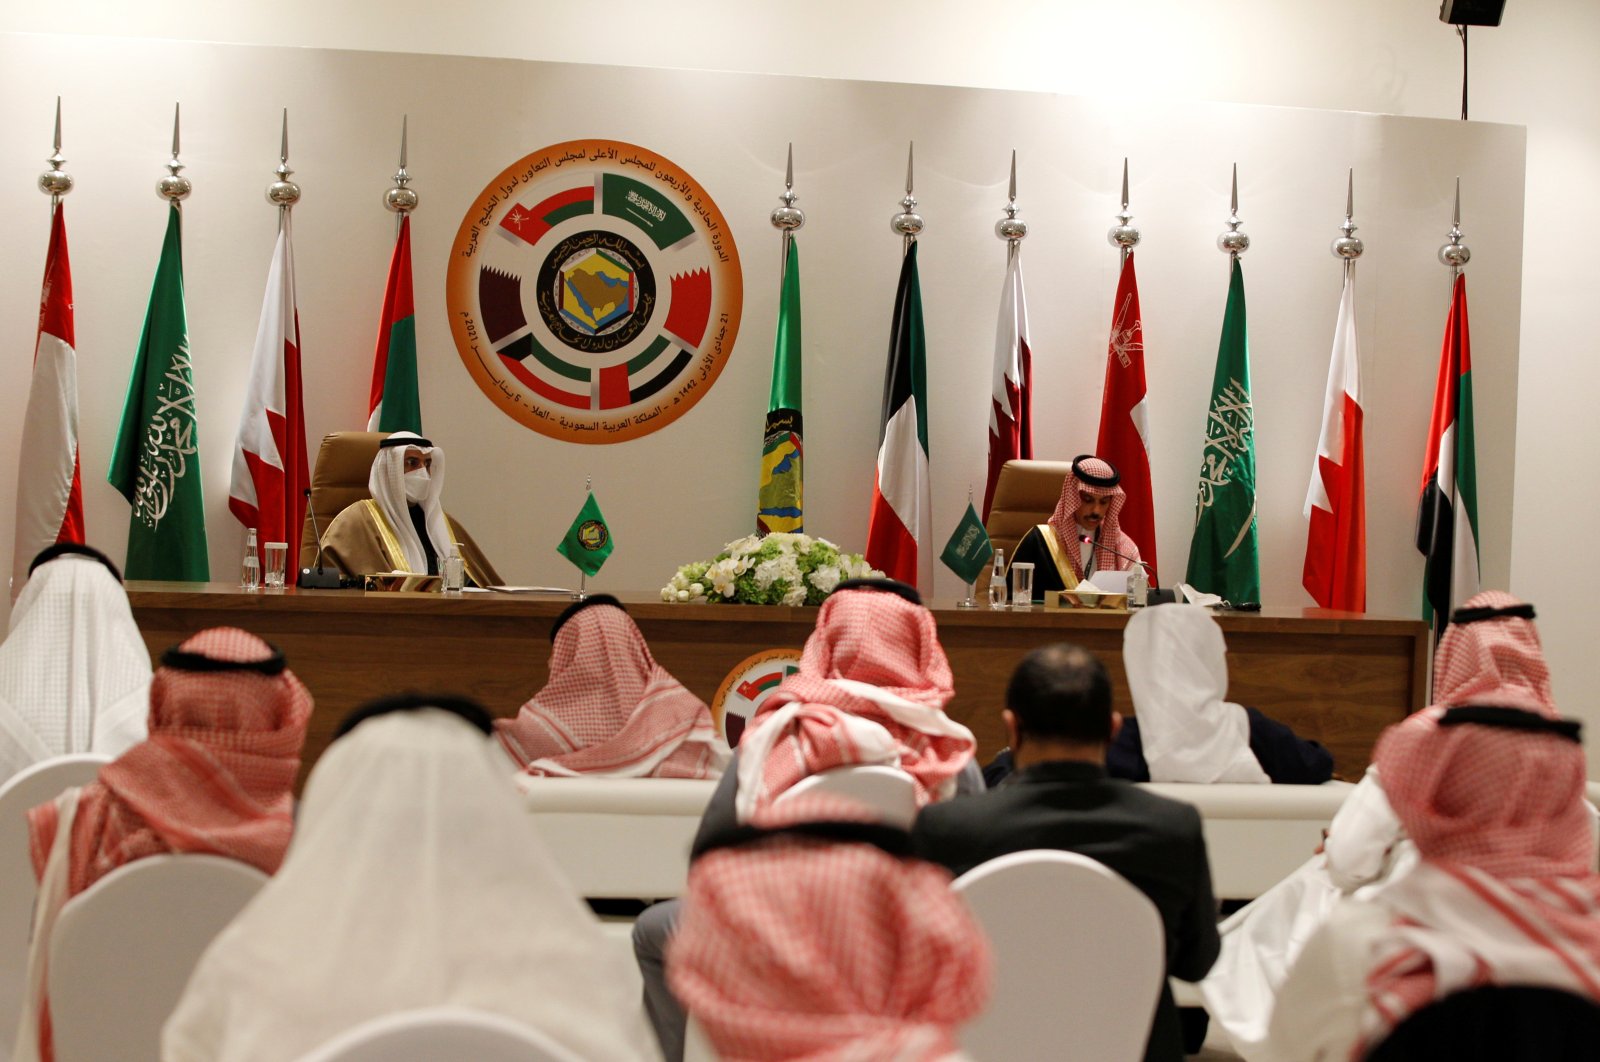 Secretary-General of the Gulf Cooperation Council (GCC) Nayef Falah al-Hajraf and Saudi Arabia's Foreign Minister Prince Faisal bin Farhan Al Saud speak during a joint news conference at the Gulf Cooperation Council's (GCC) 41st Summit in Al-Ula, Saudi Arabia on Jan. 5, 2021. (Reuters Photo)